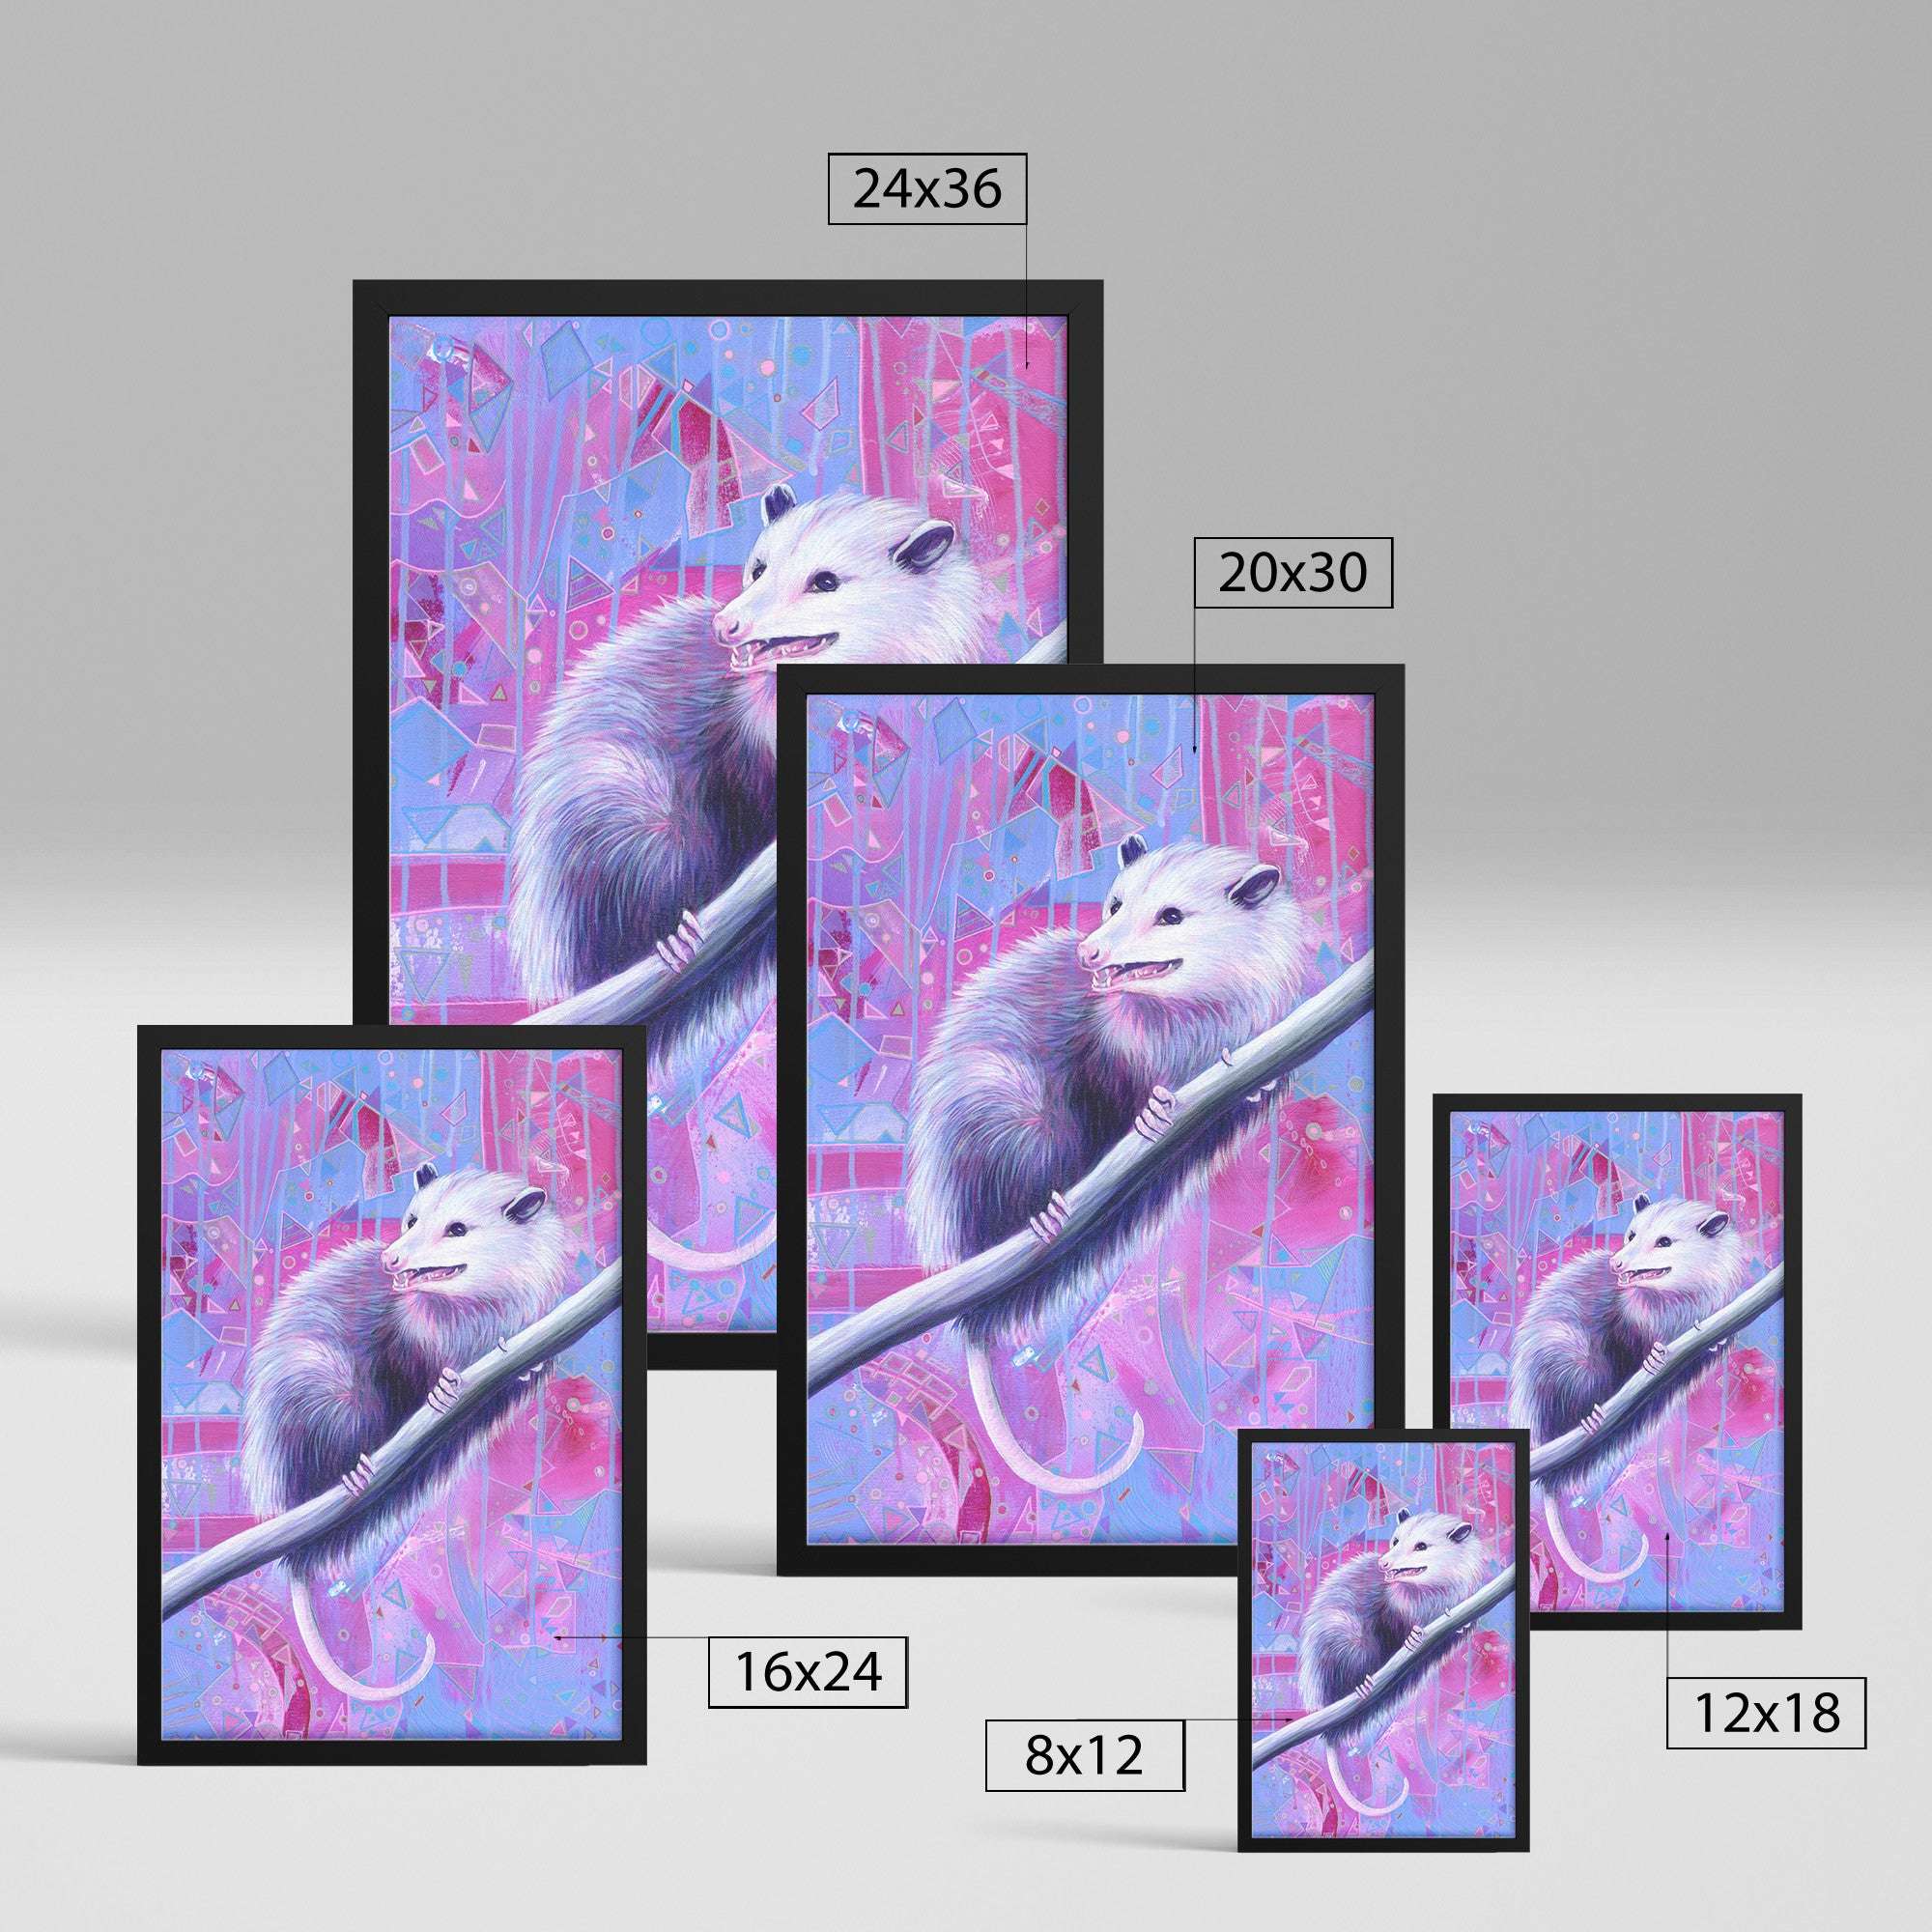 Collection of colorful artwork prints featuring a Framed Opossum Art Print on a branch, displayed in various sizes from 8x12 to 24x36 inches.